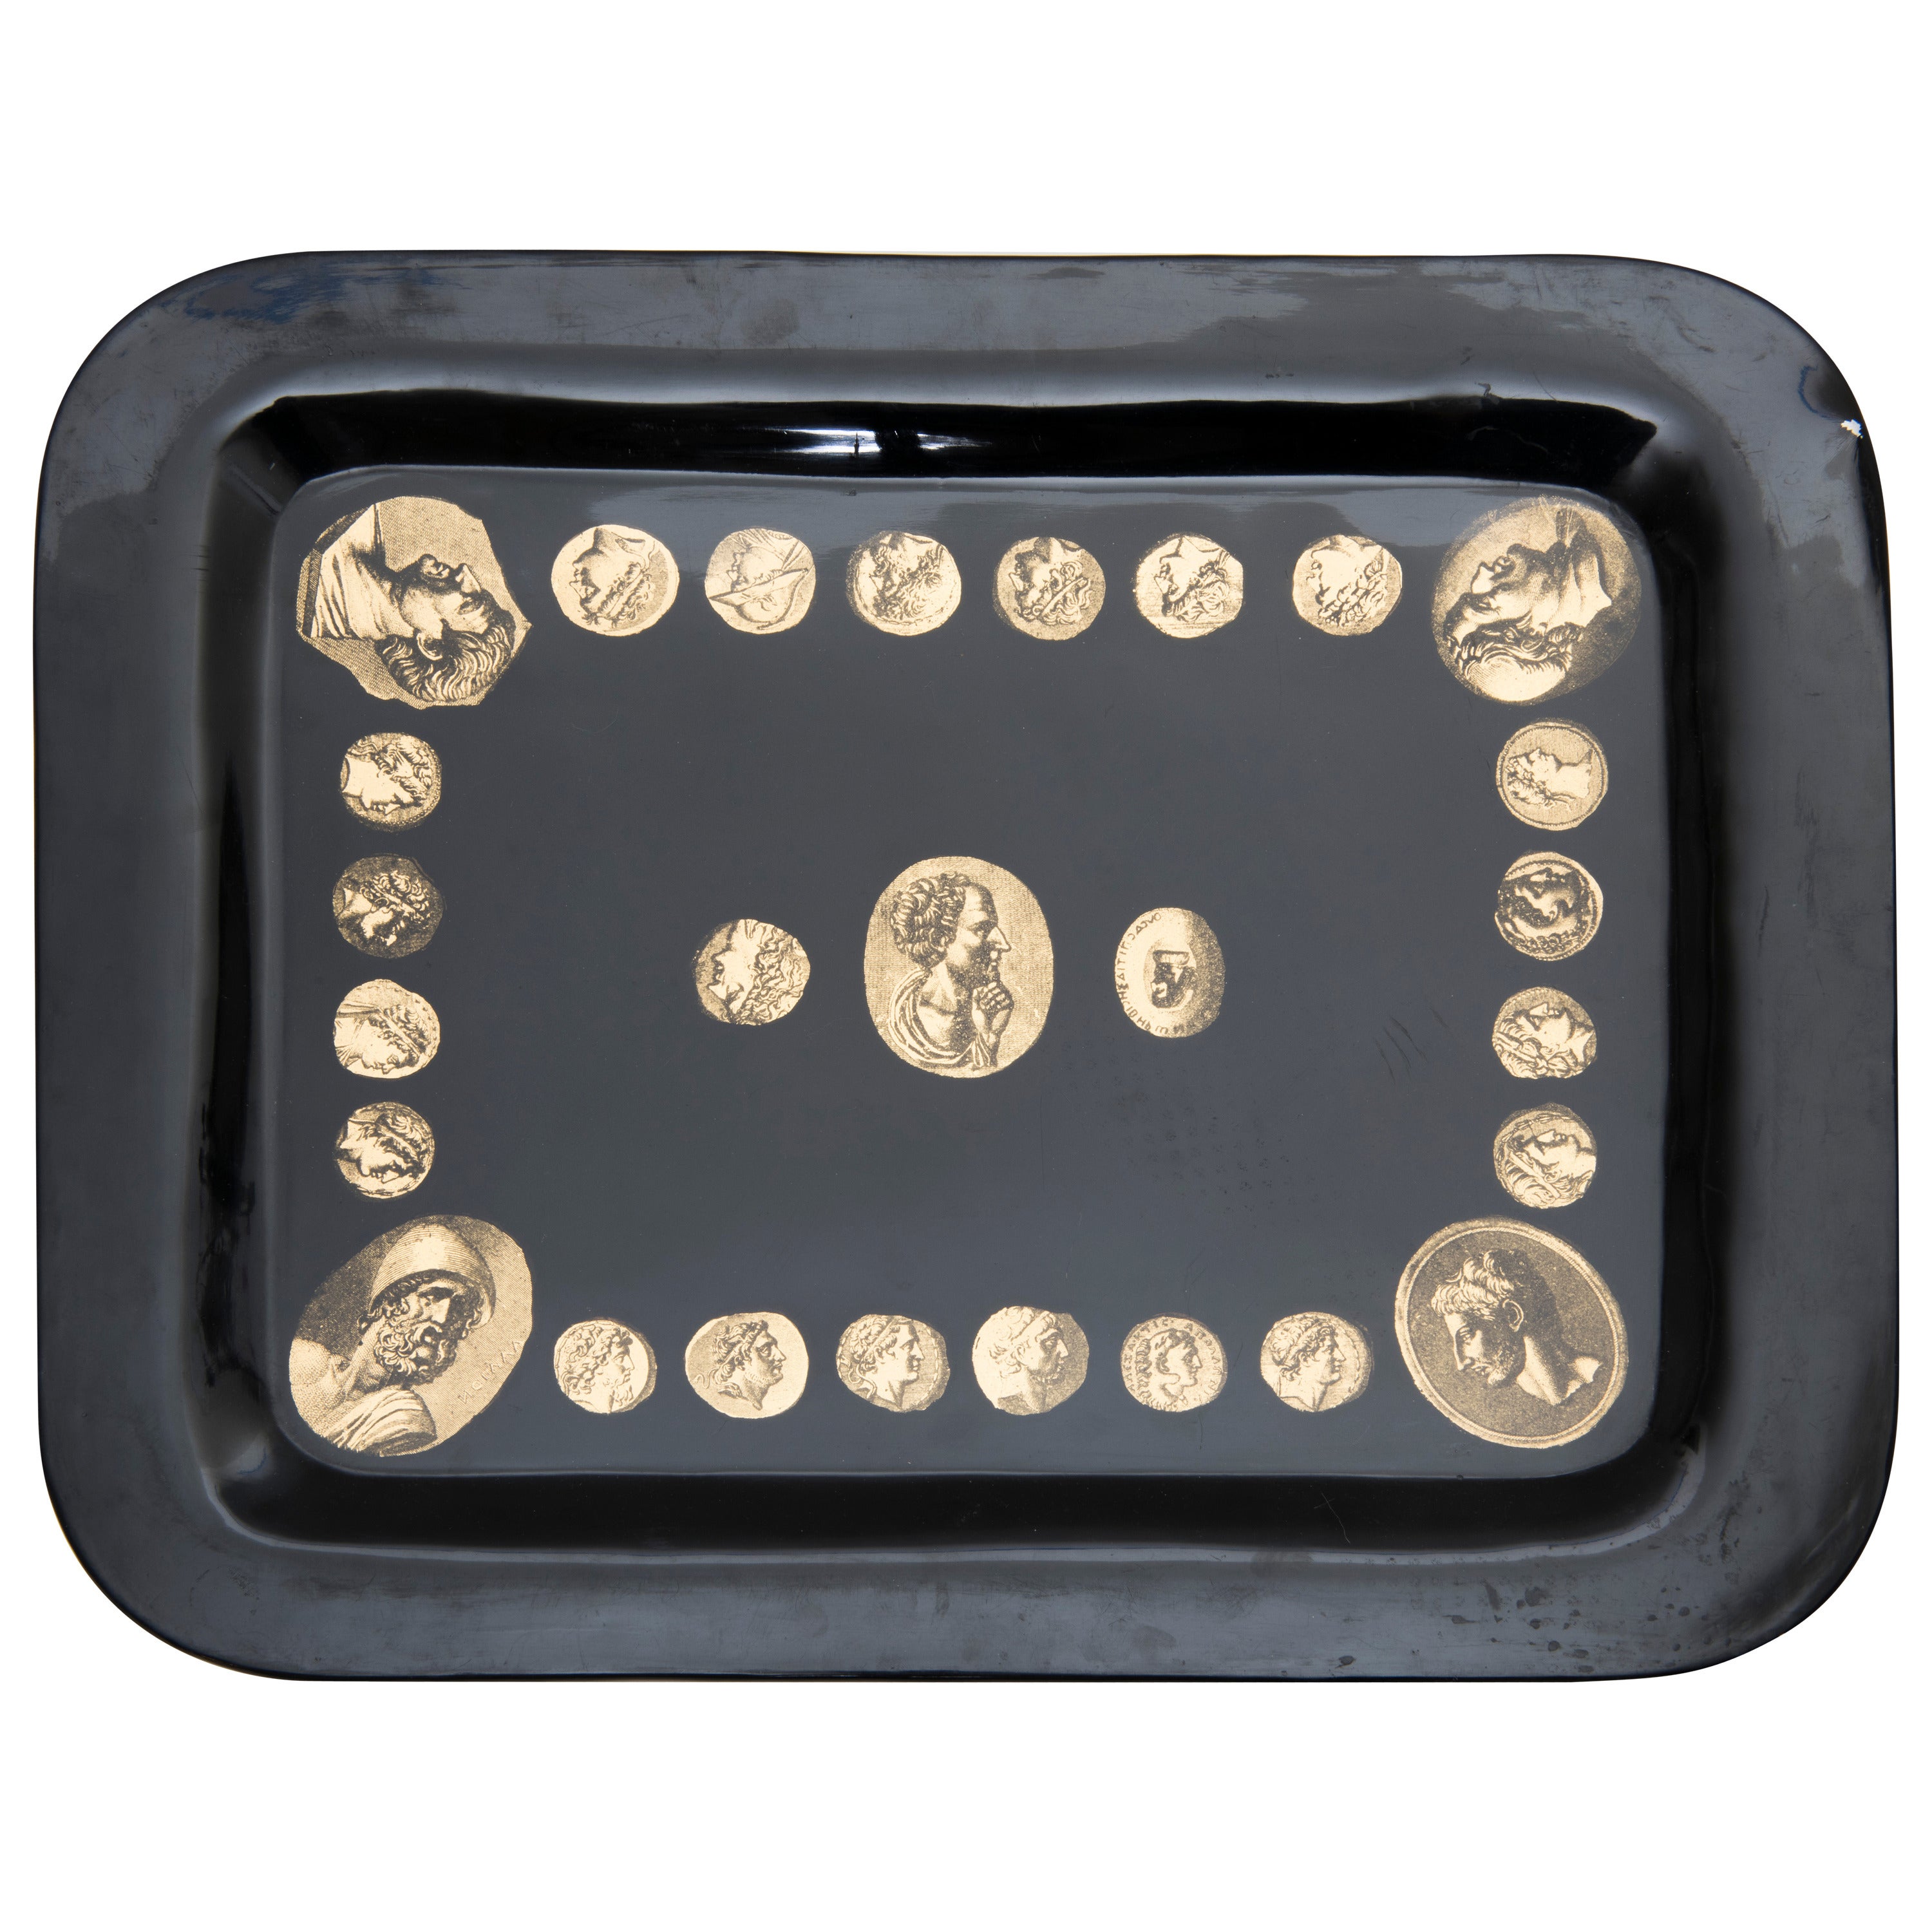 Early "Cammei" Tray by Piero Fornasetti, 1950s For Sale